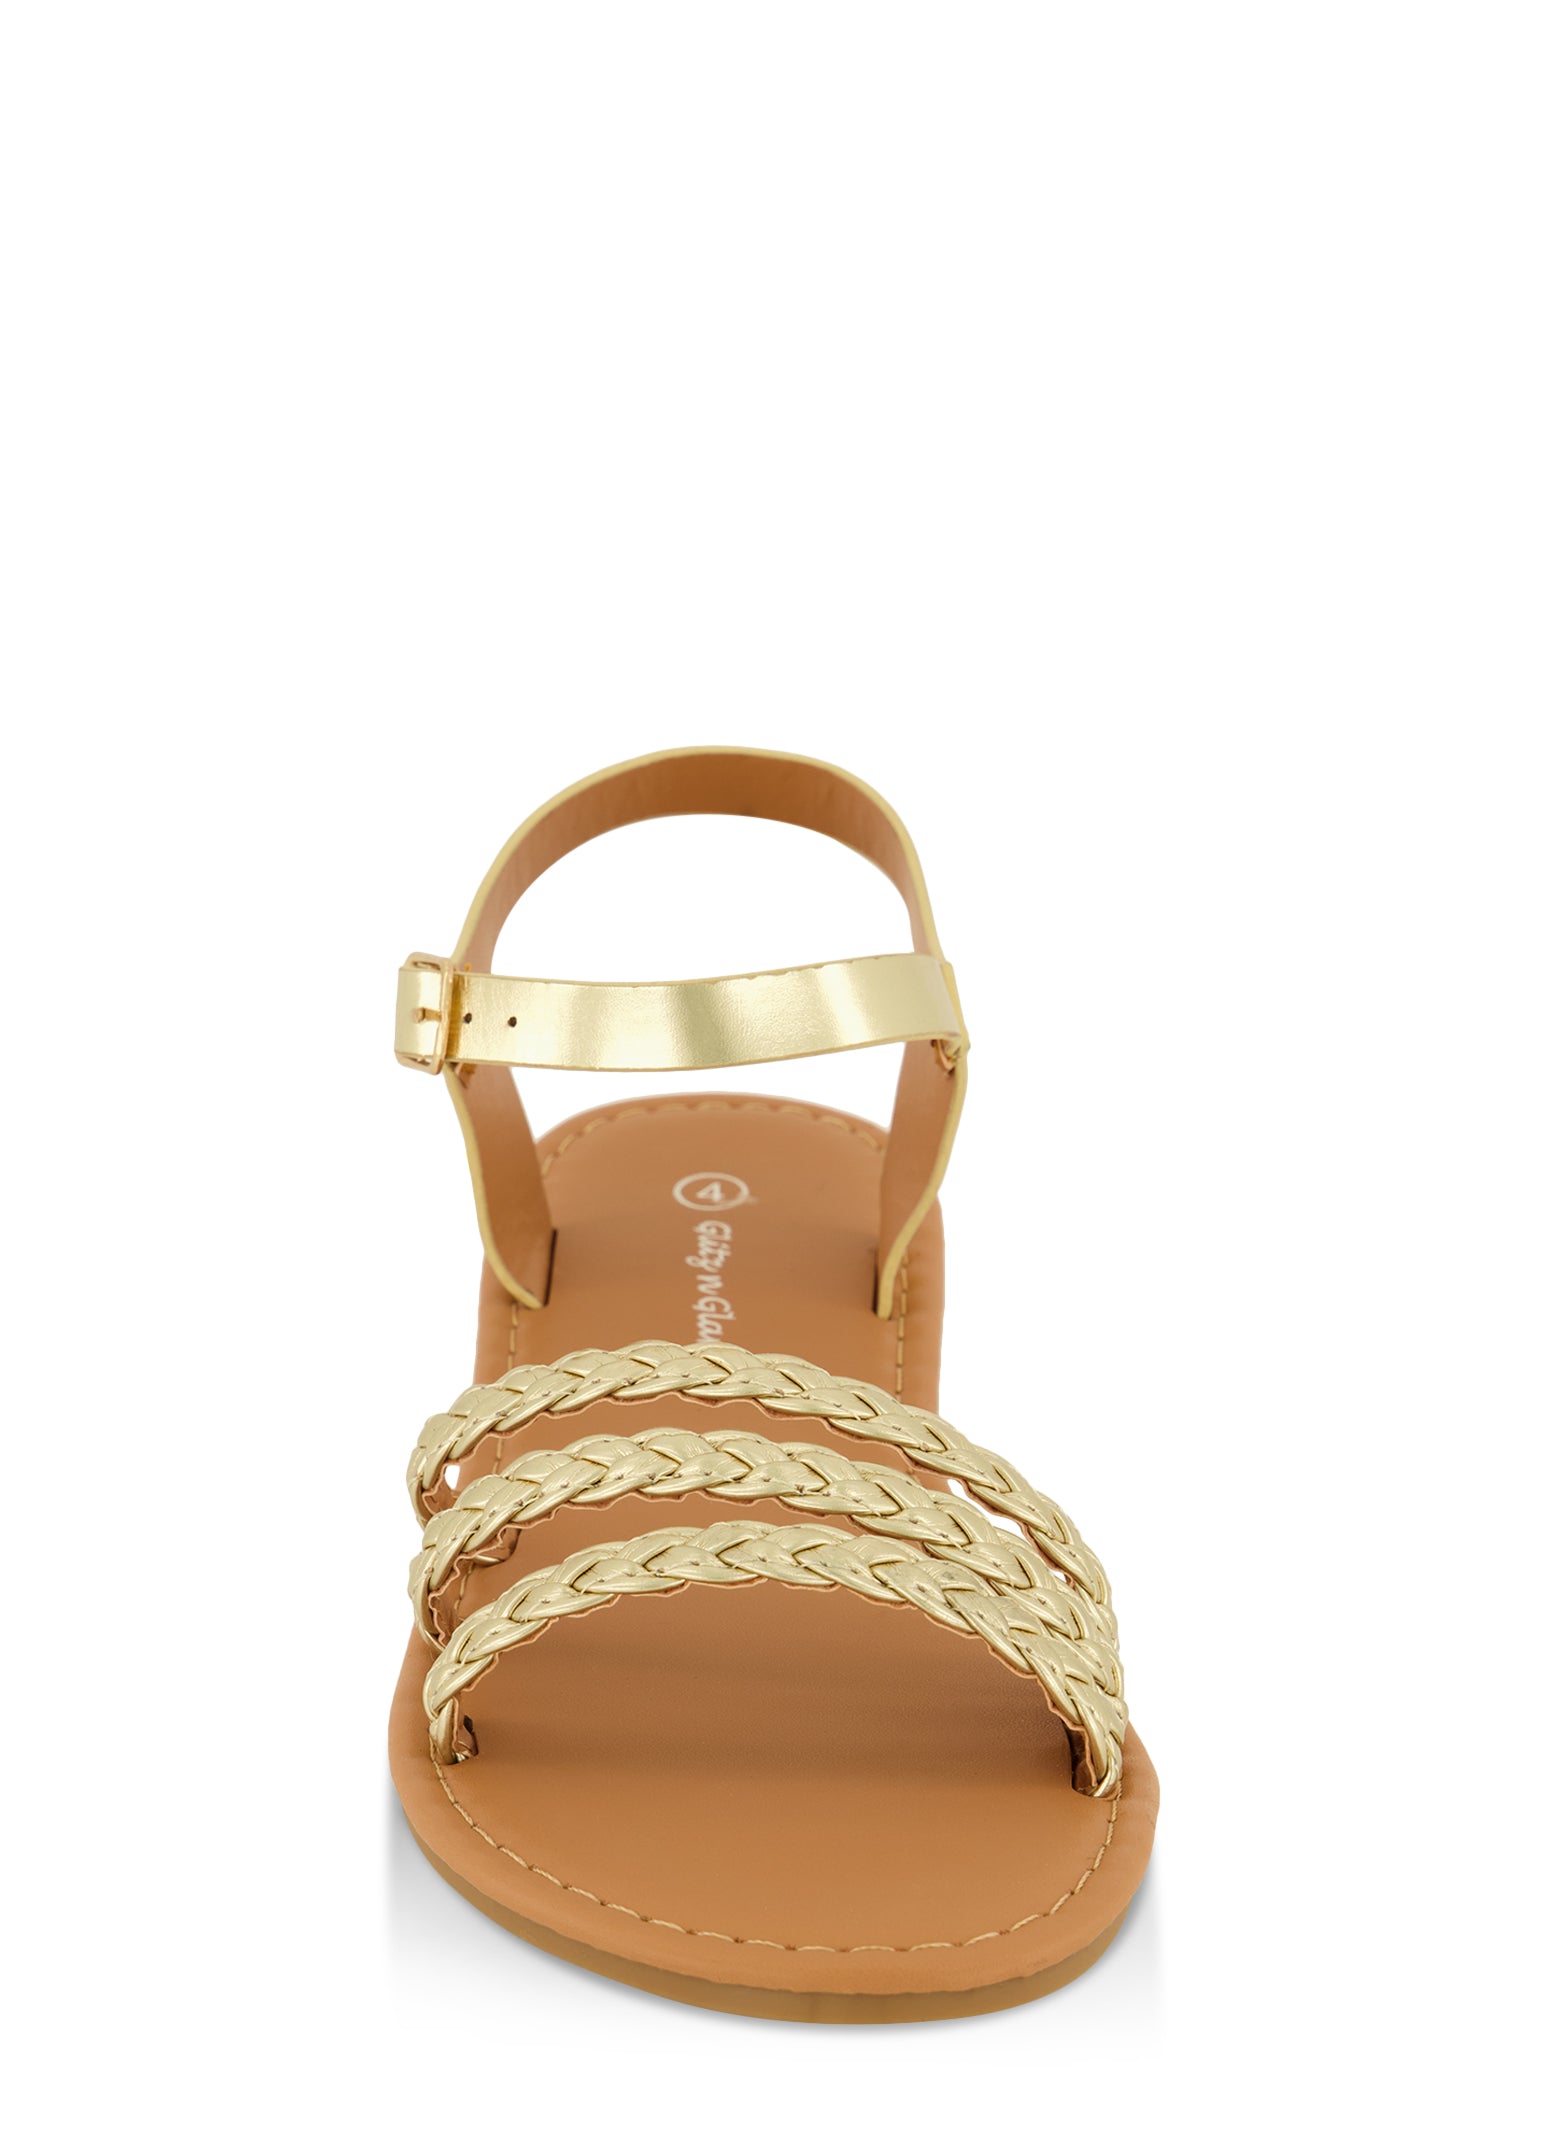 Womens Girls Braided Strappy Ankle Strap Sandals, Gold, Size 4